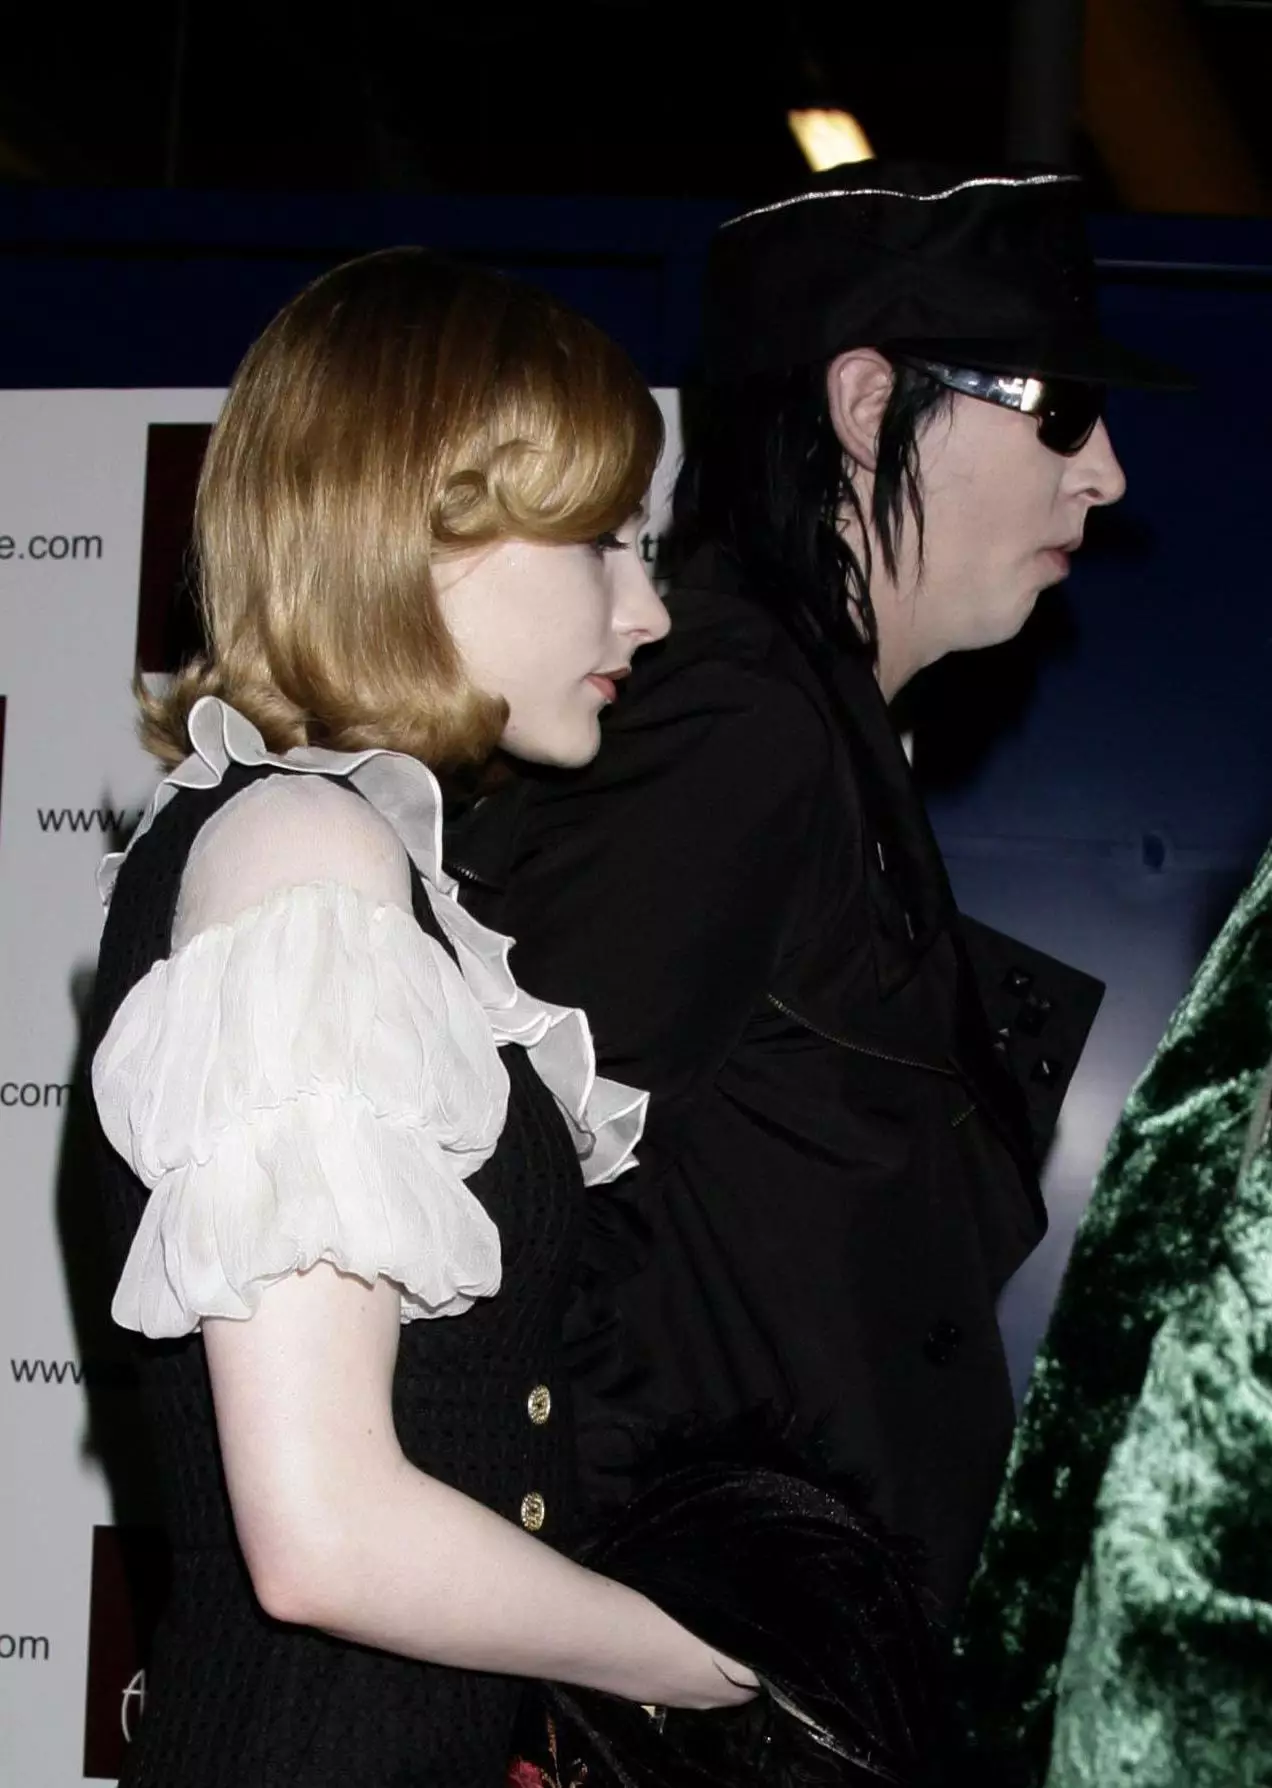 Wood and Manson in 2007 (